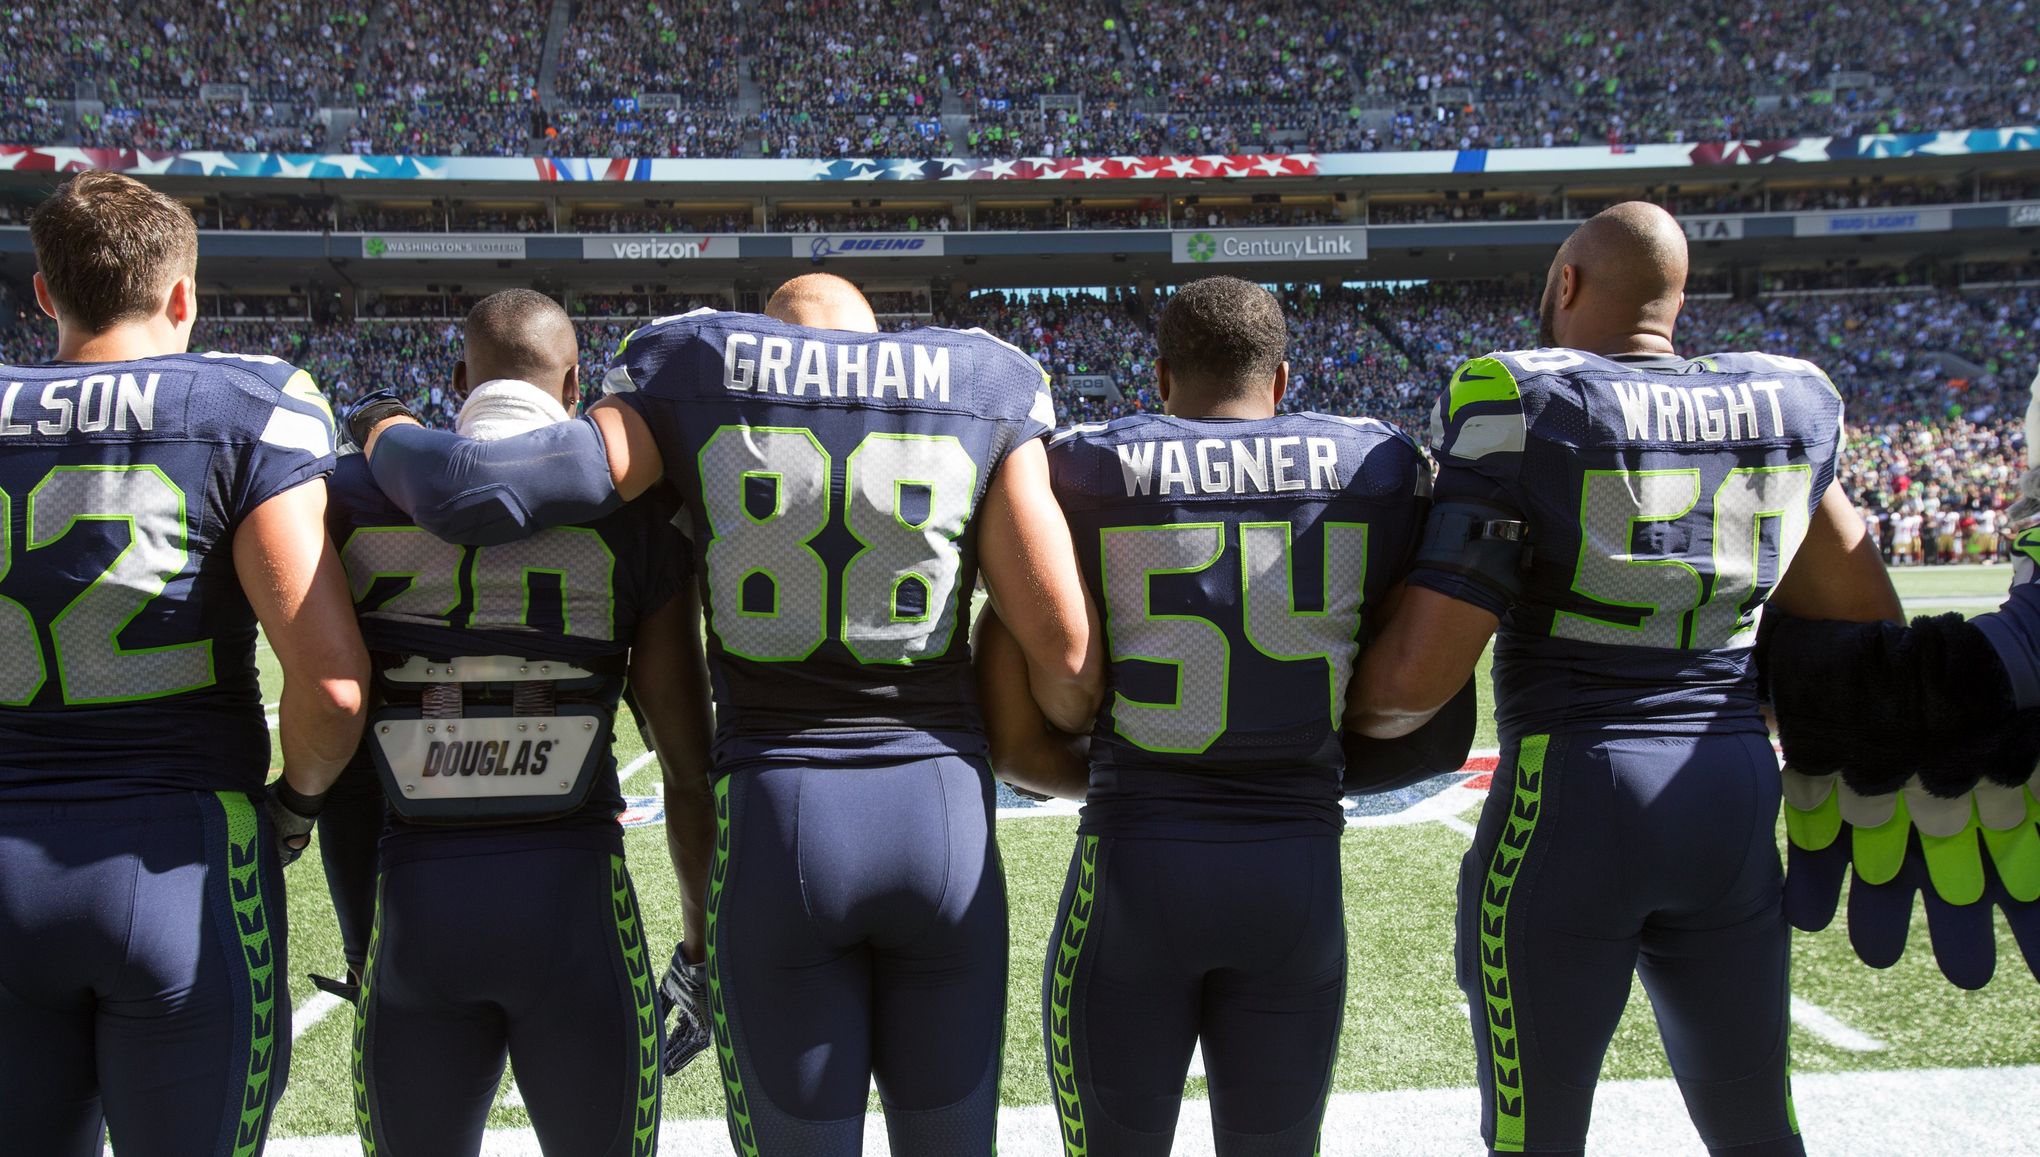 49ers' Colin Kaepernick kneels, Seahawks stand arm-in-arm during